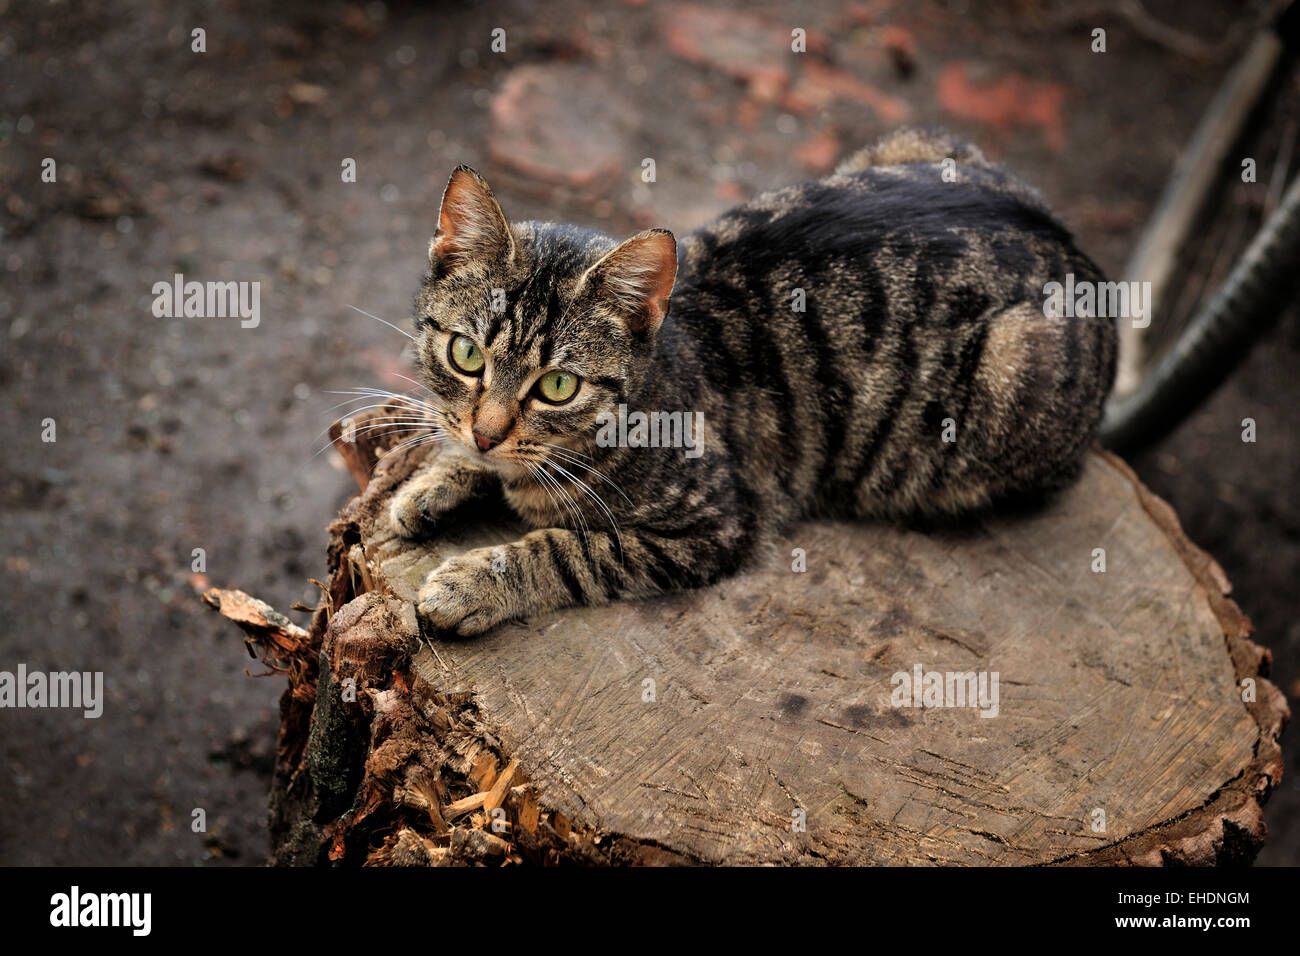 cat, animal, outdoor,animals, cat, ear, emotion, empty, expression, eyes, young, domestic, domestic animal, domestic cat, domestic cats, natur, Stock Photo